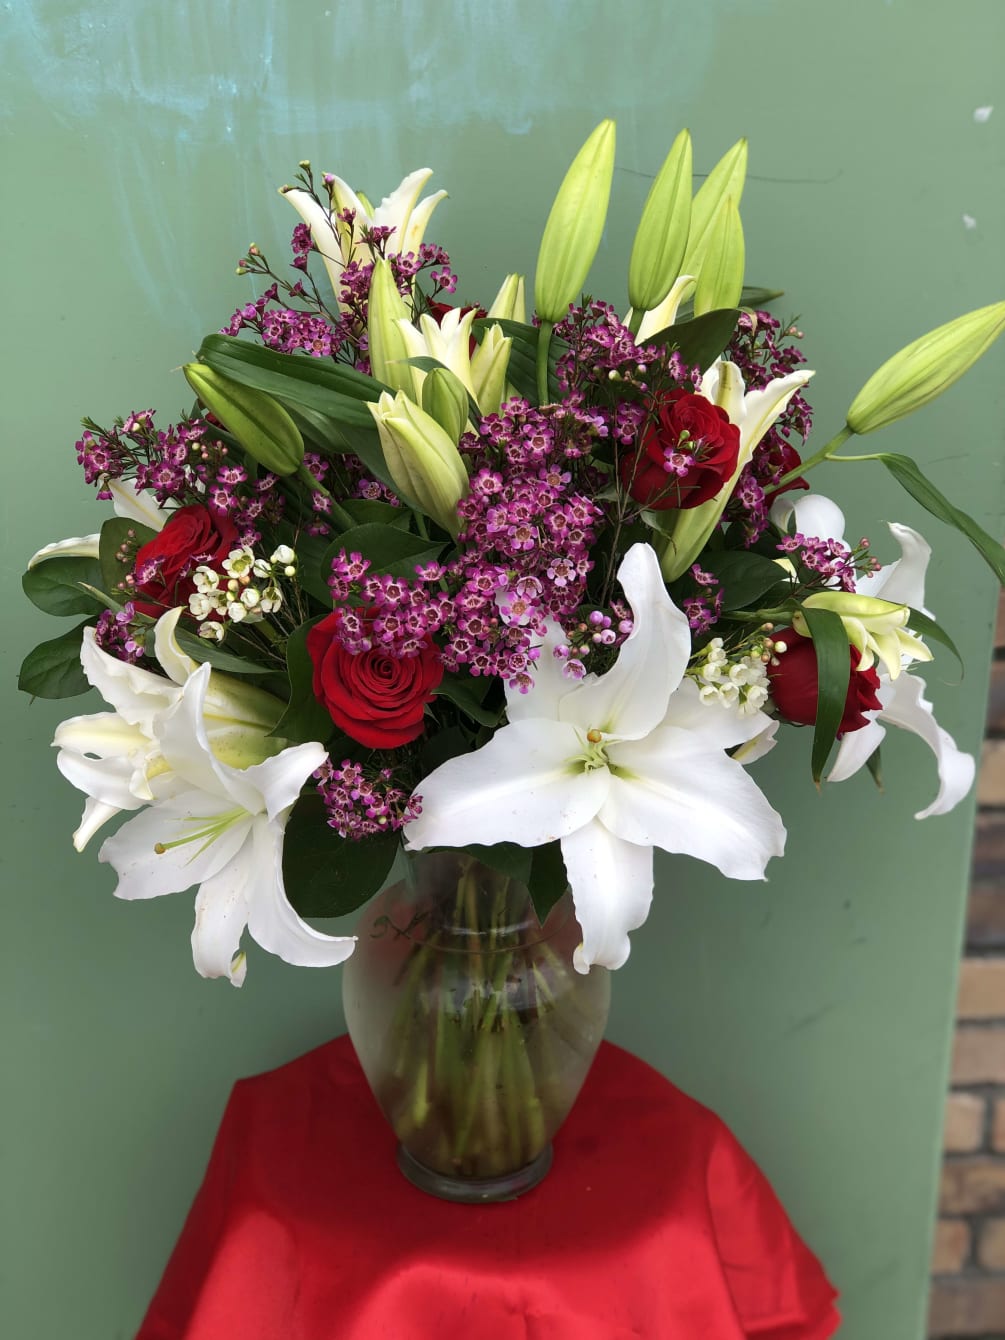 Roses and Lilies arranged to perfection in a vase 